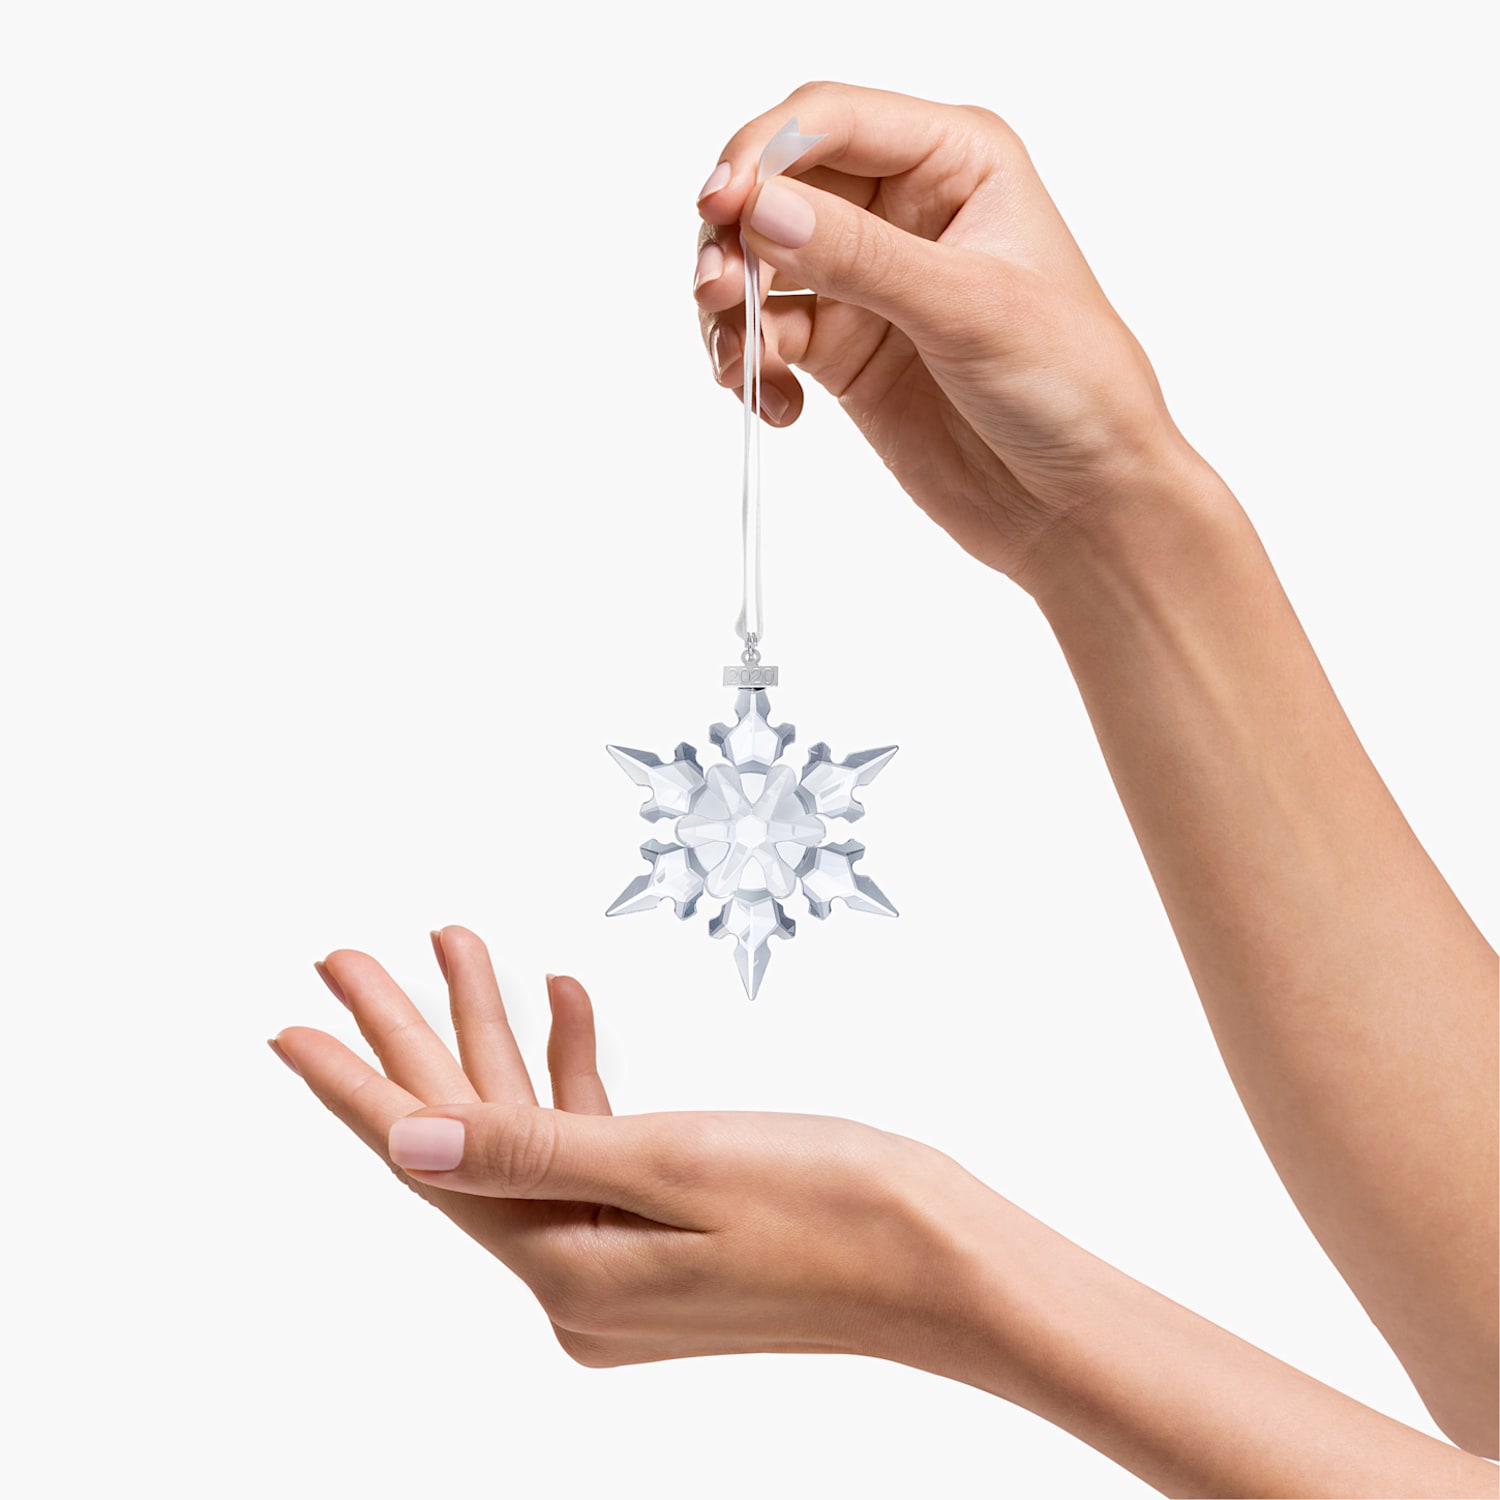 Details about   Crystal Large Annual Edition Christmas GIFT Ornament New 2020 Snowflake Holiday 